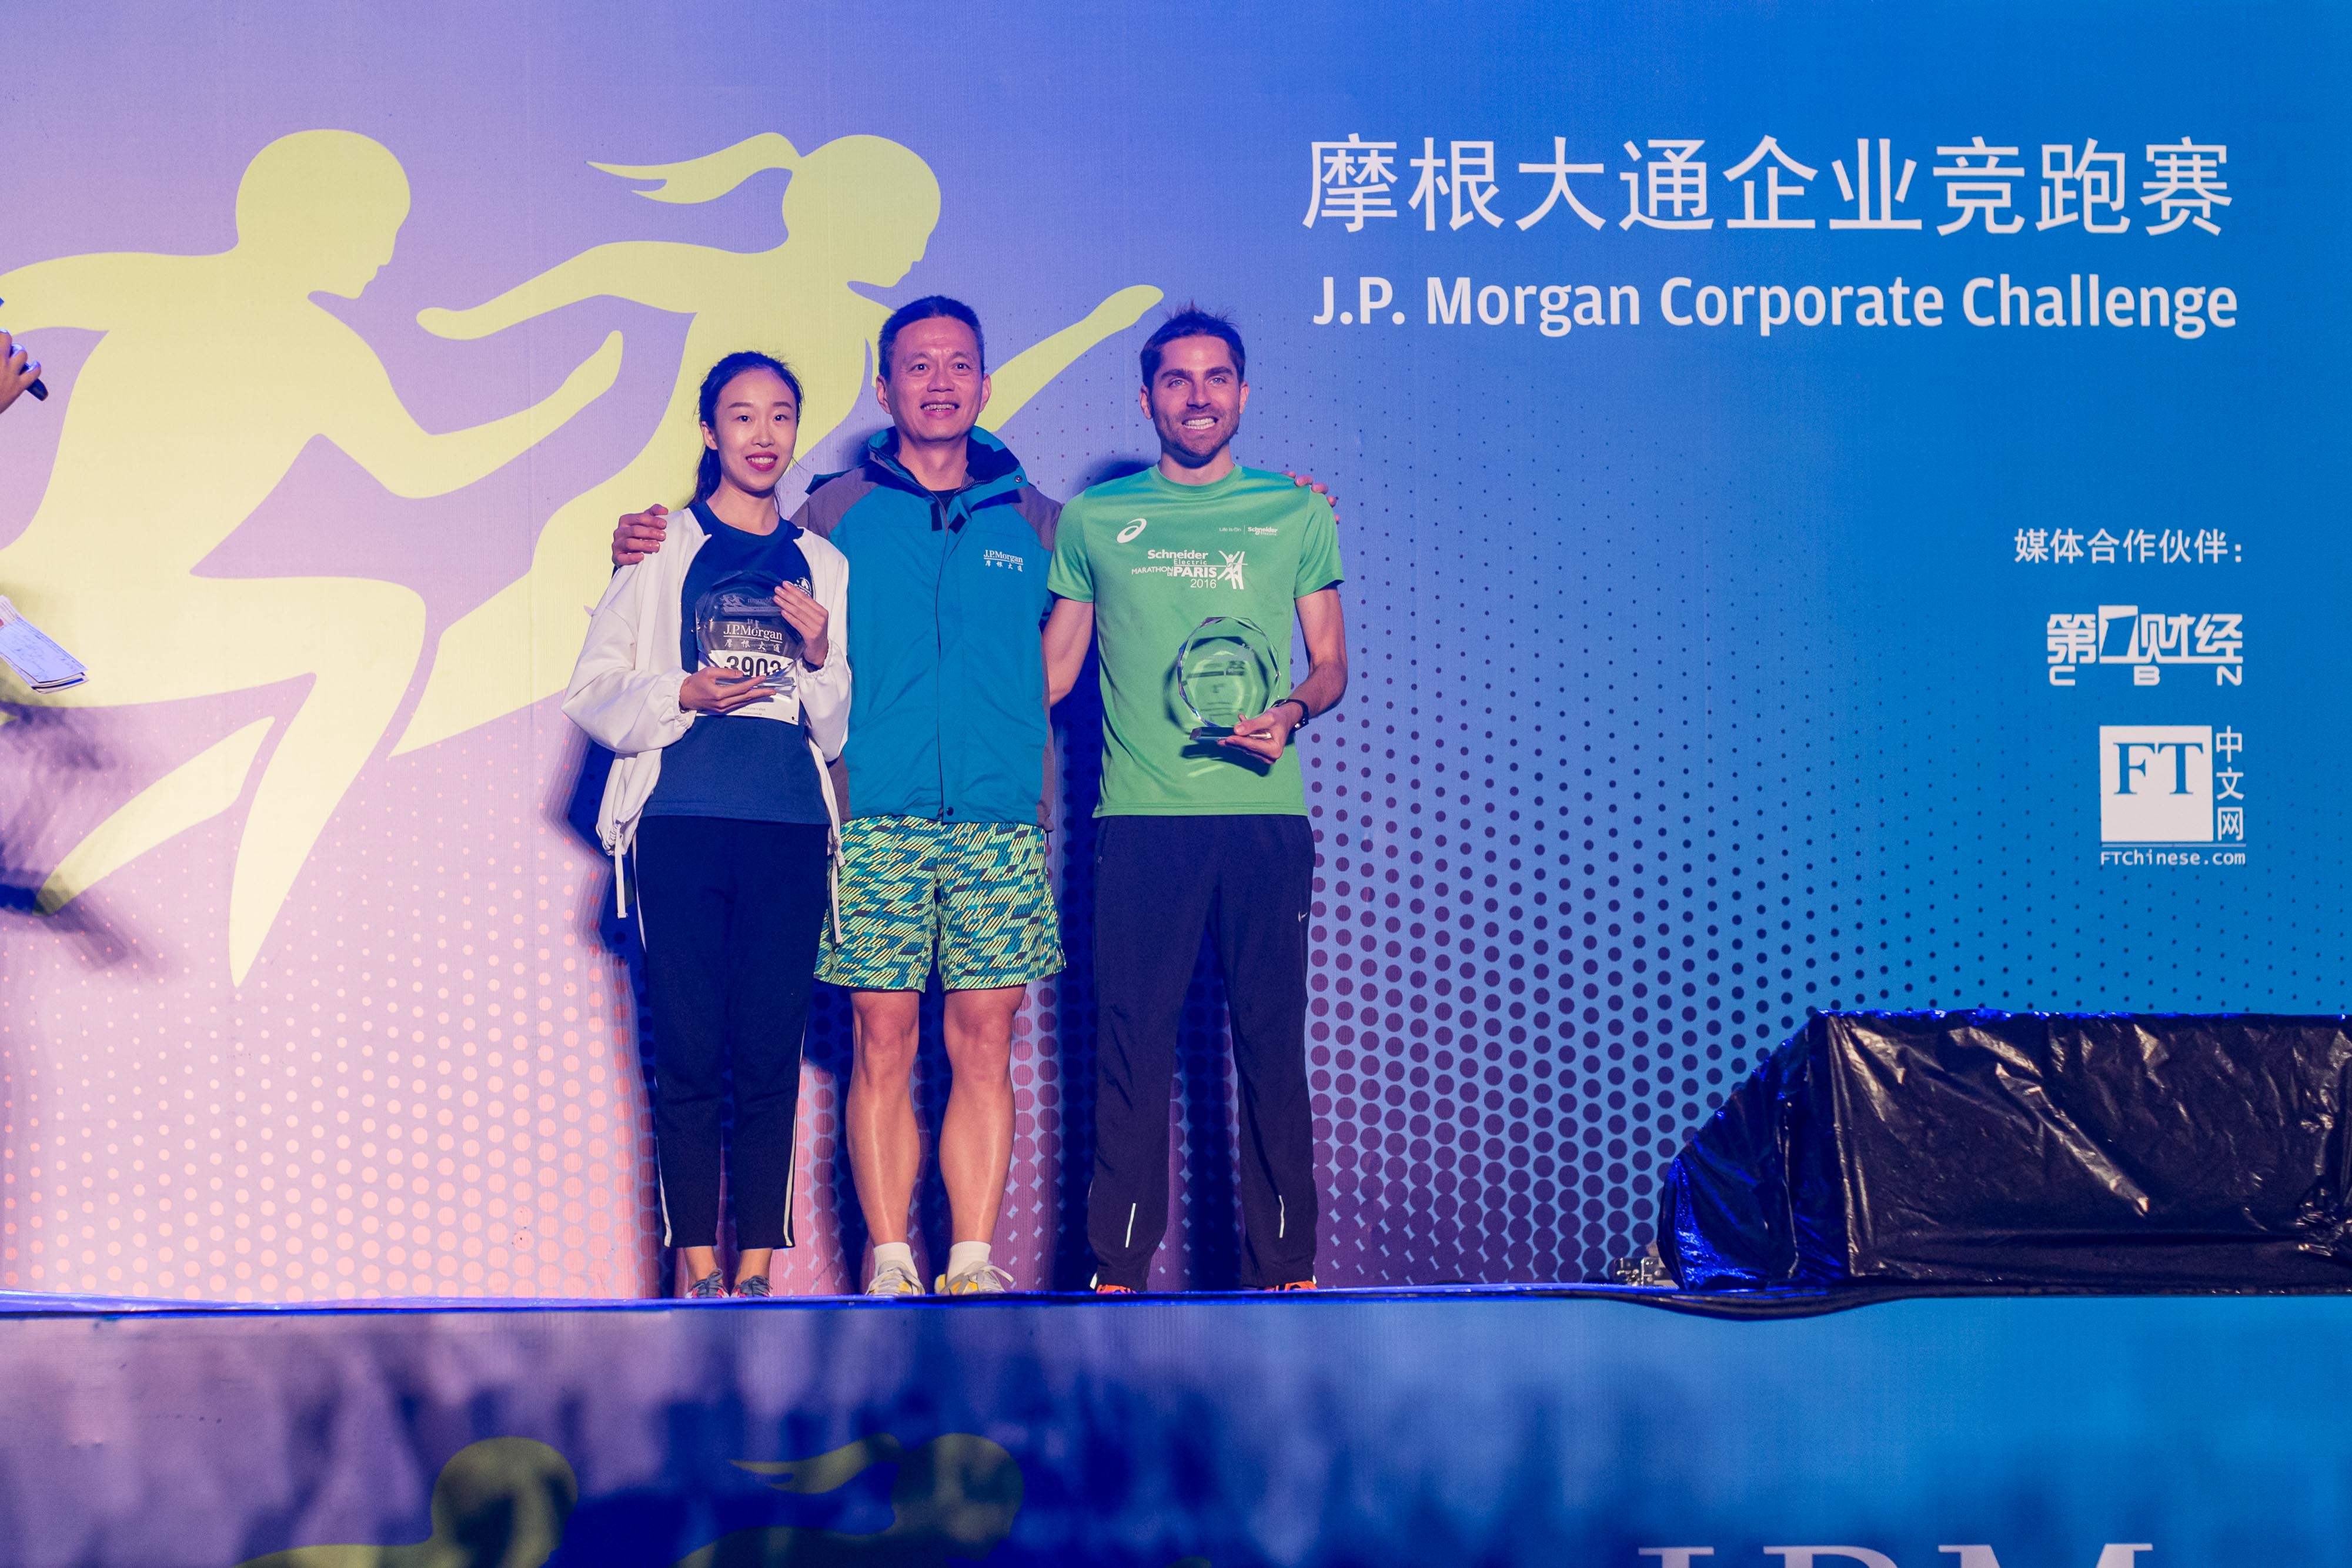 Prize presentation to the male and female winners of the J.P. Morgan Corporate Challenge in Shanghai.